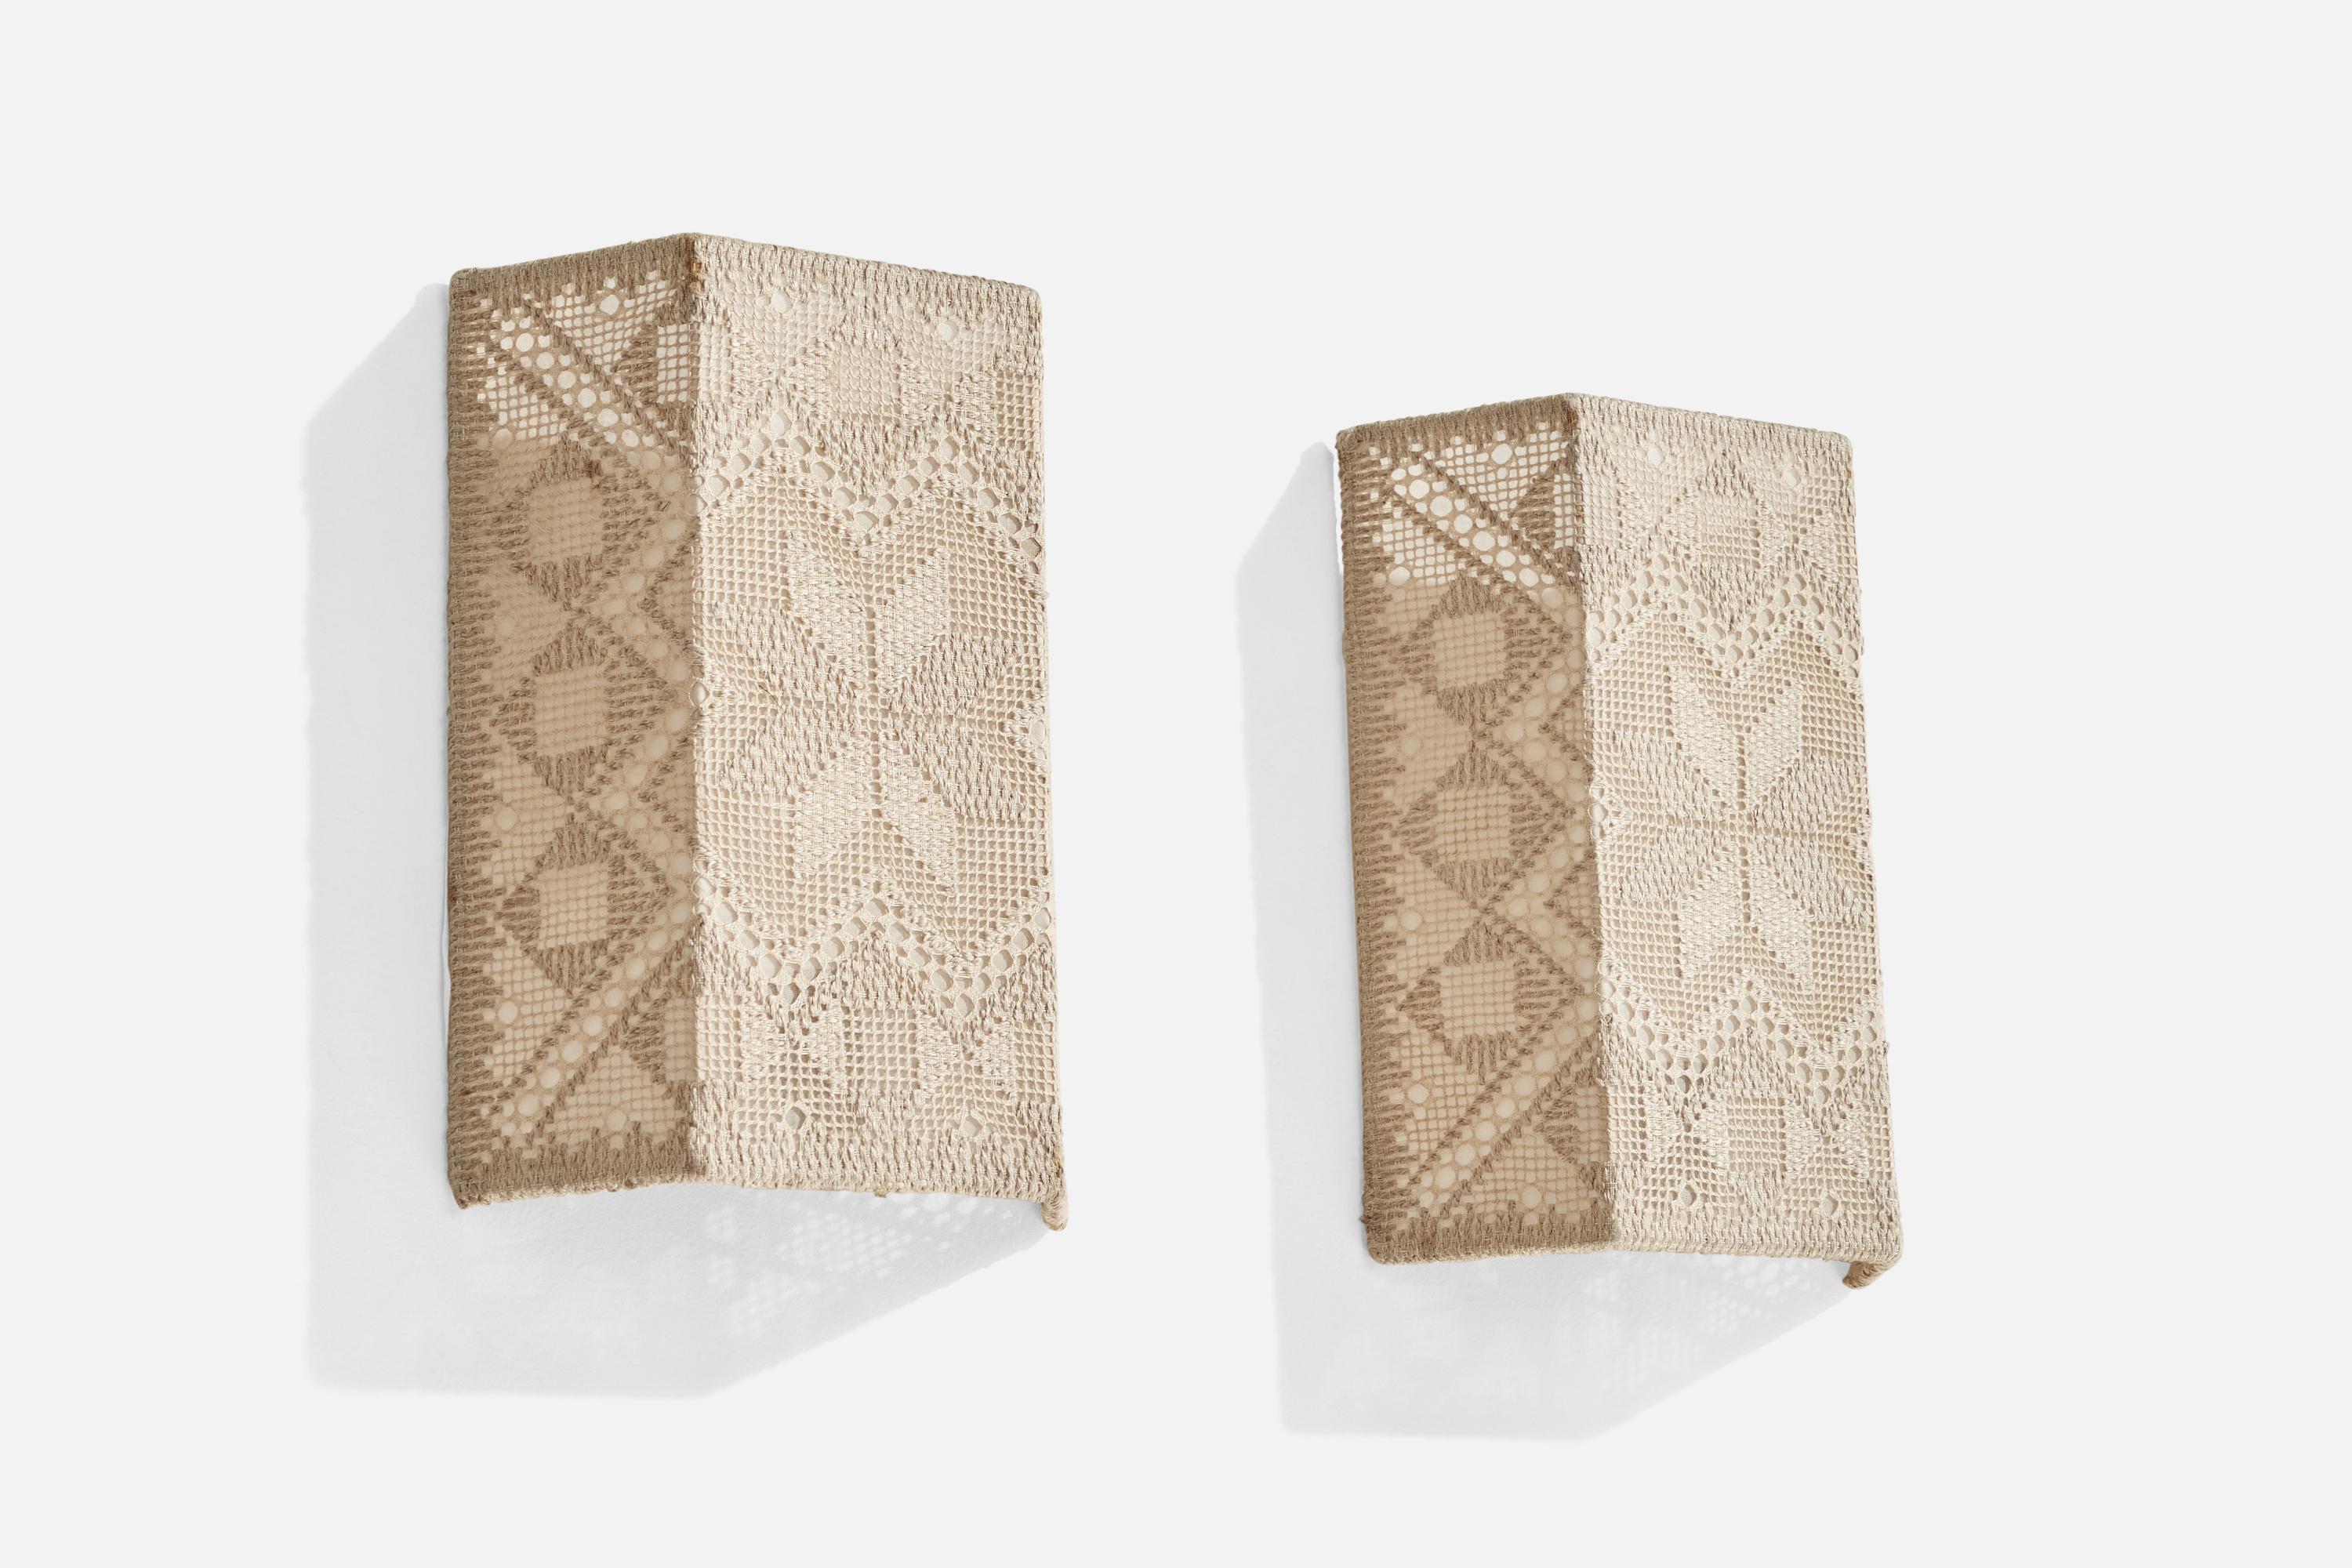 A pair of metal and hand-embroidered fabric wall lights designed and produced in Sweden, c. 1960s.

Overall Dimensions (inches): 10.5”  H x 7.75” W x 2.75” D
Back Plate Dimensions (inches): N/A
Bulb Specifications: E-12 Bulb
Number of Sockets: 2
All